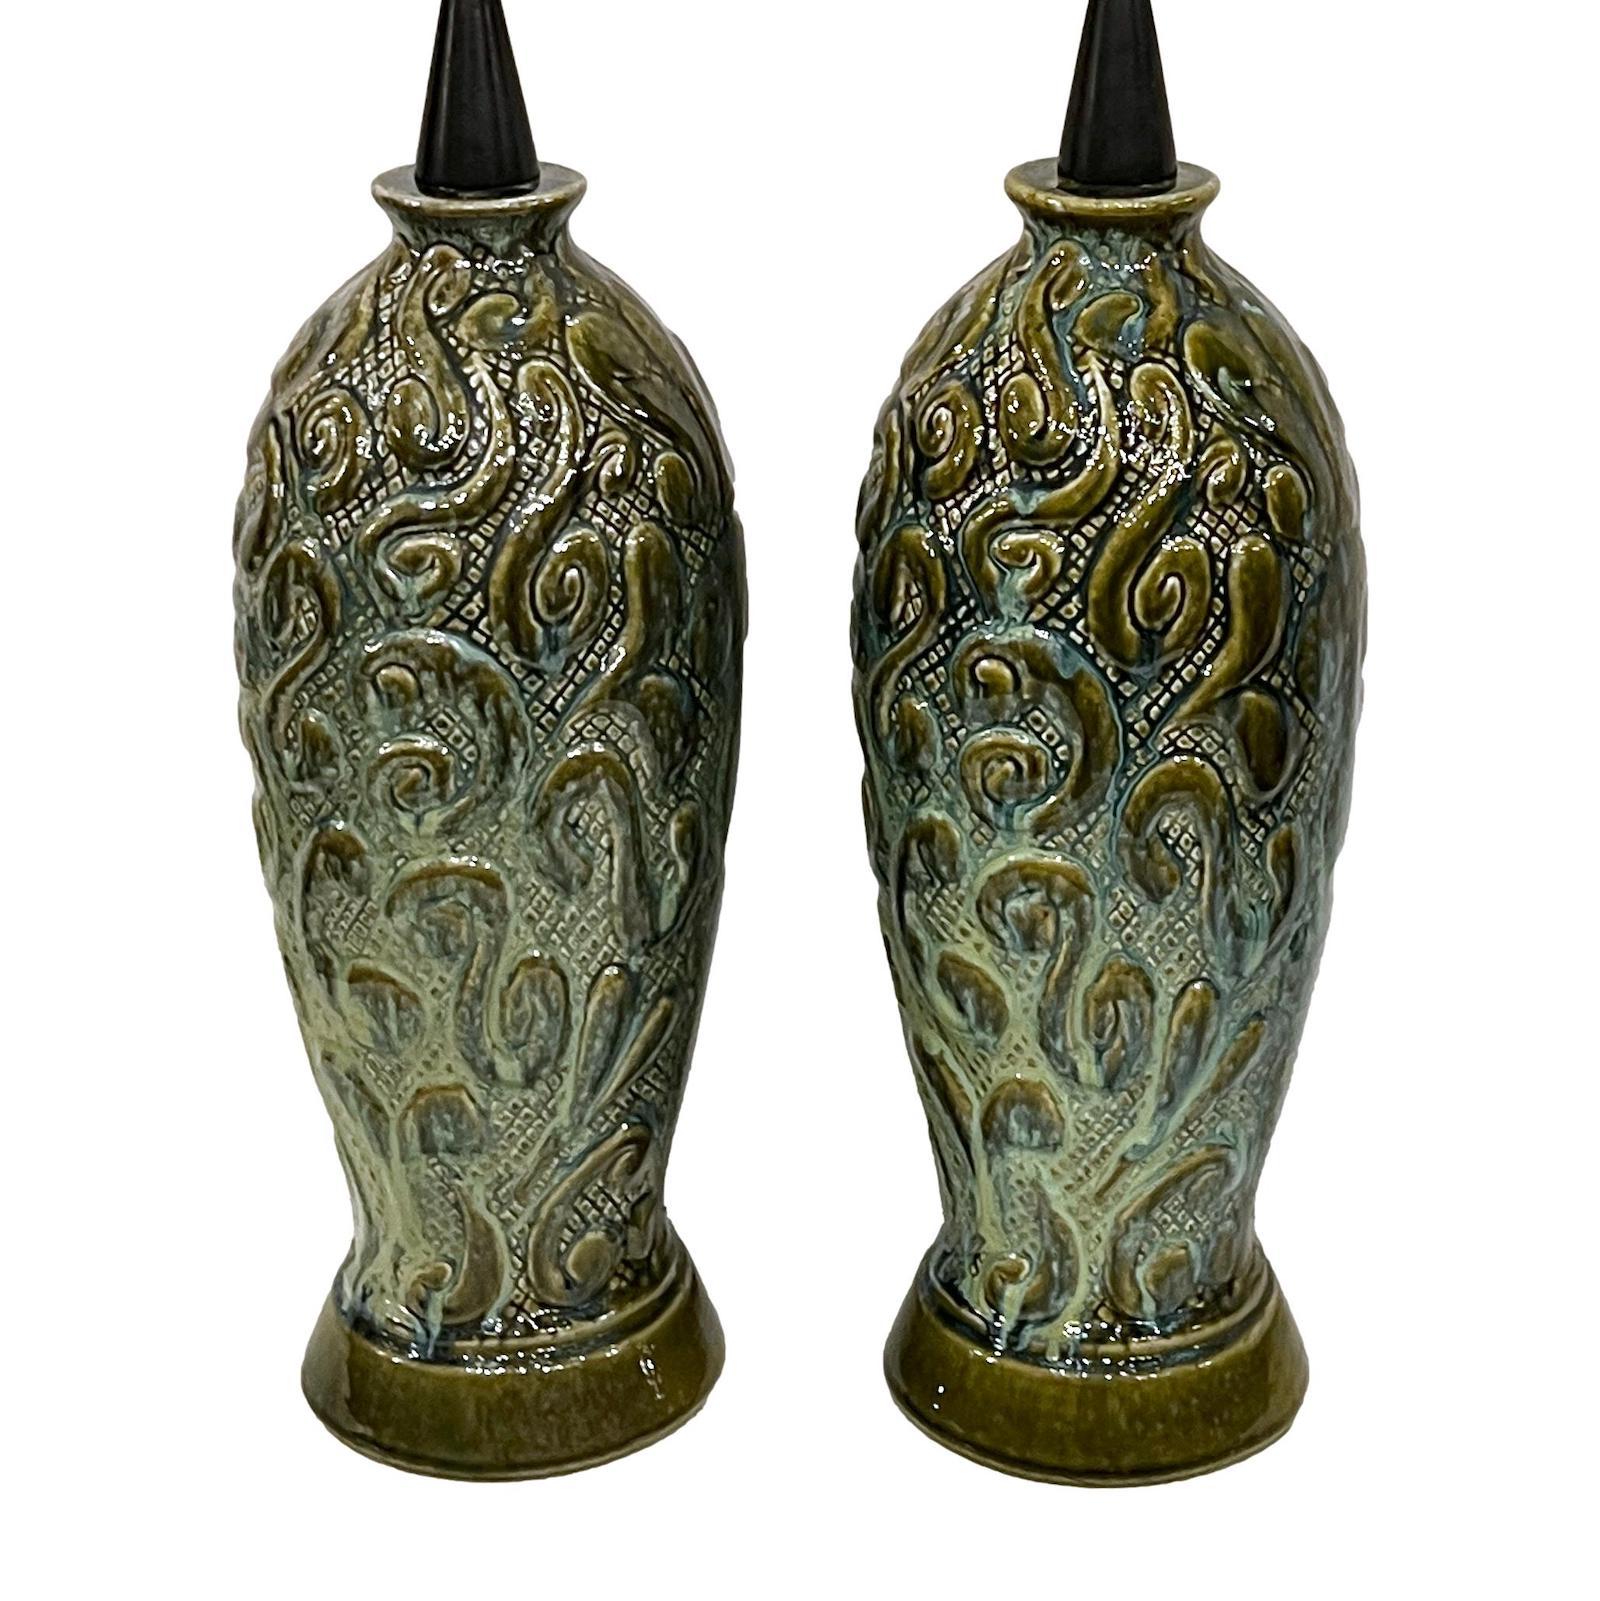 Pair of circa 1960s French table lamps with glazed porcelain stylised-foliage motif.

Measurements:
Height of body: 19